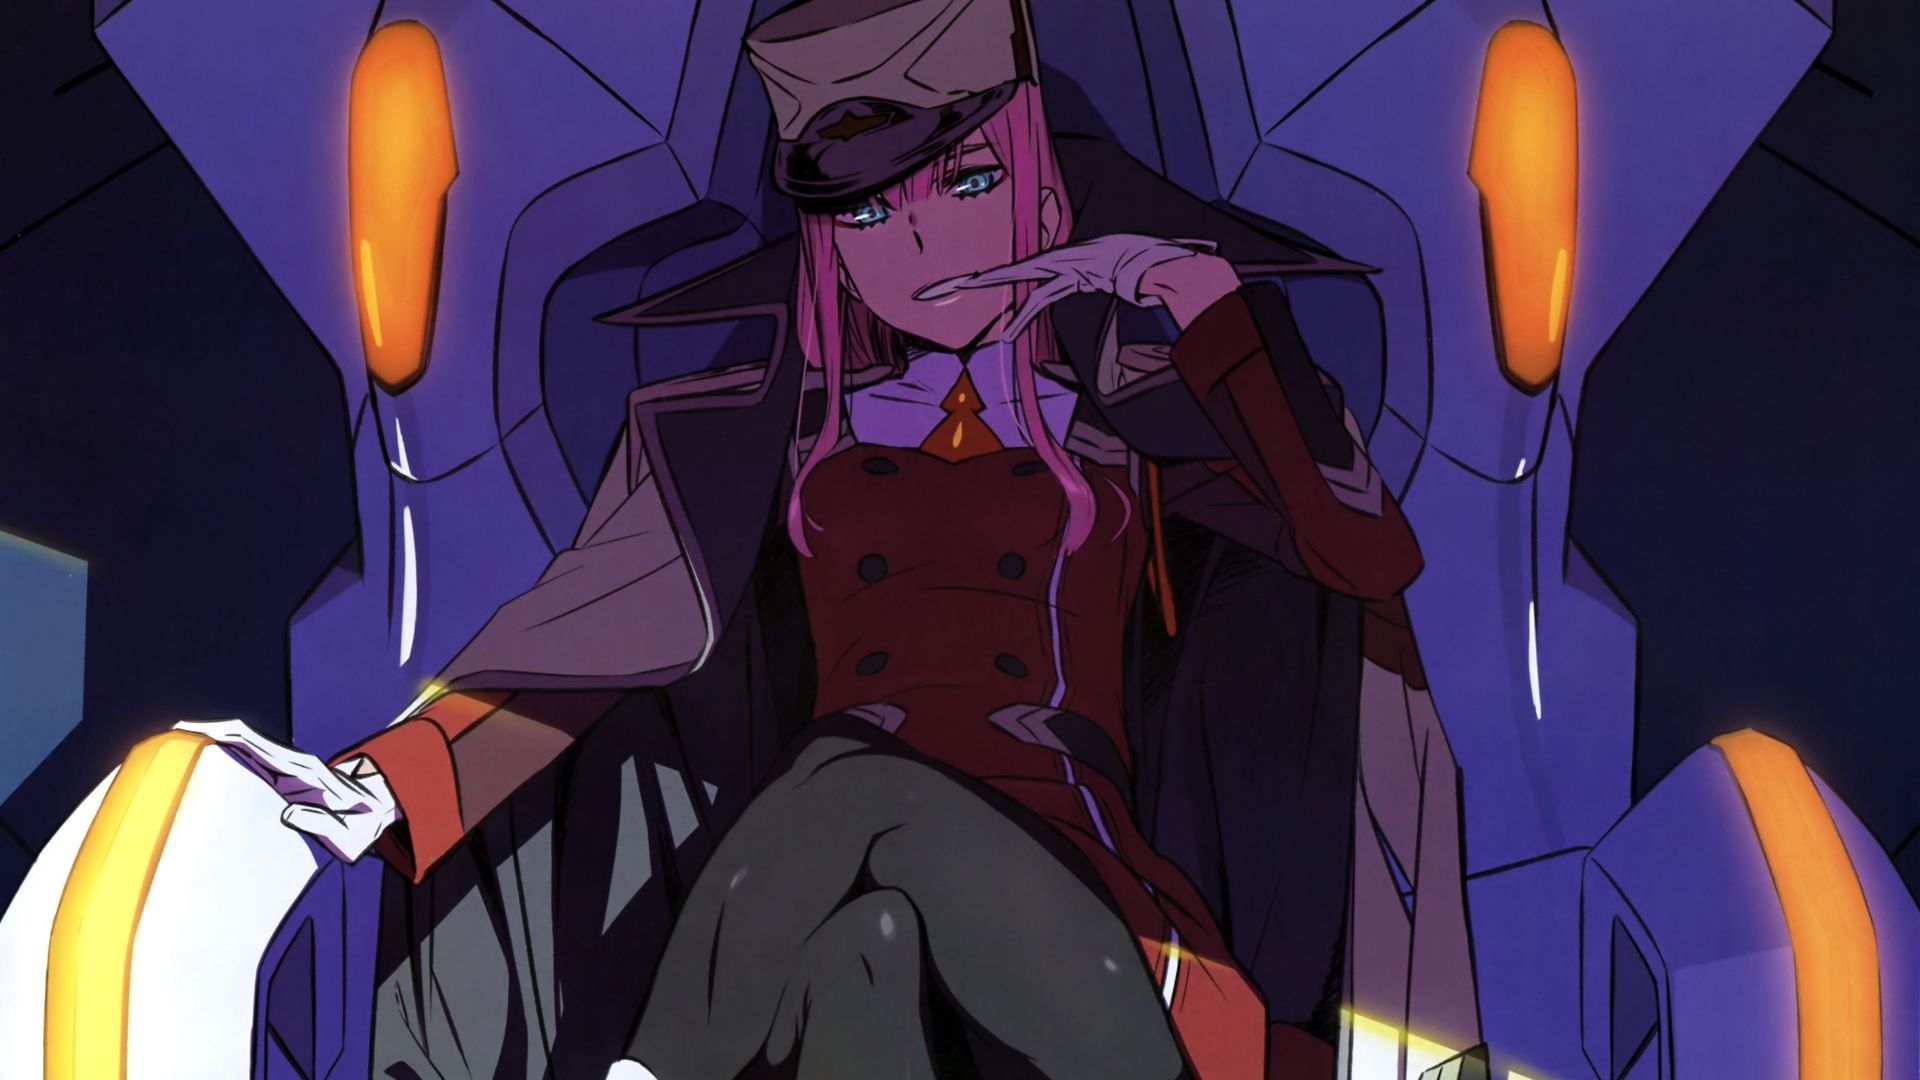 Desktop wallpaper zero two, darling in the franxx, anime girl, calm, HD image, picture, background, 963c8a